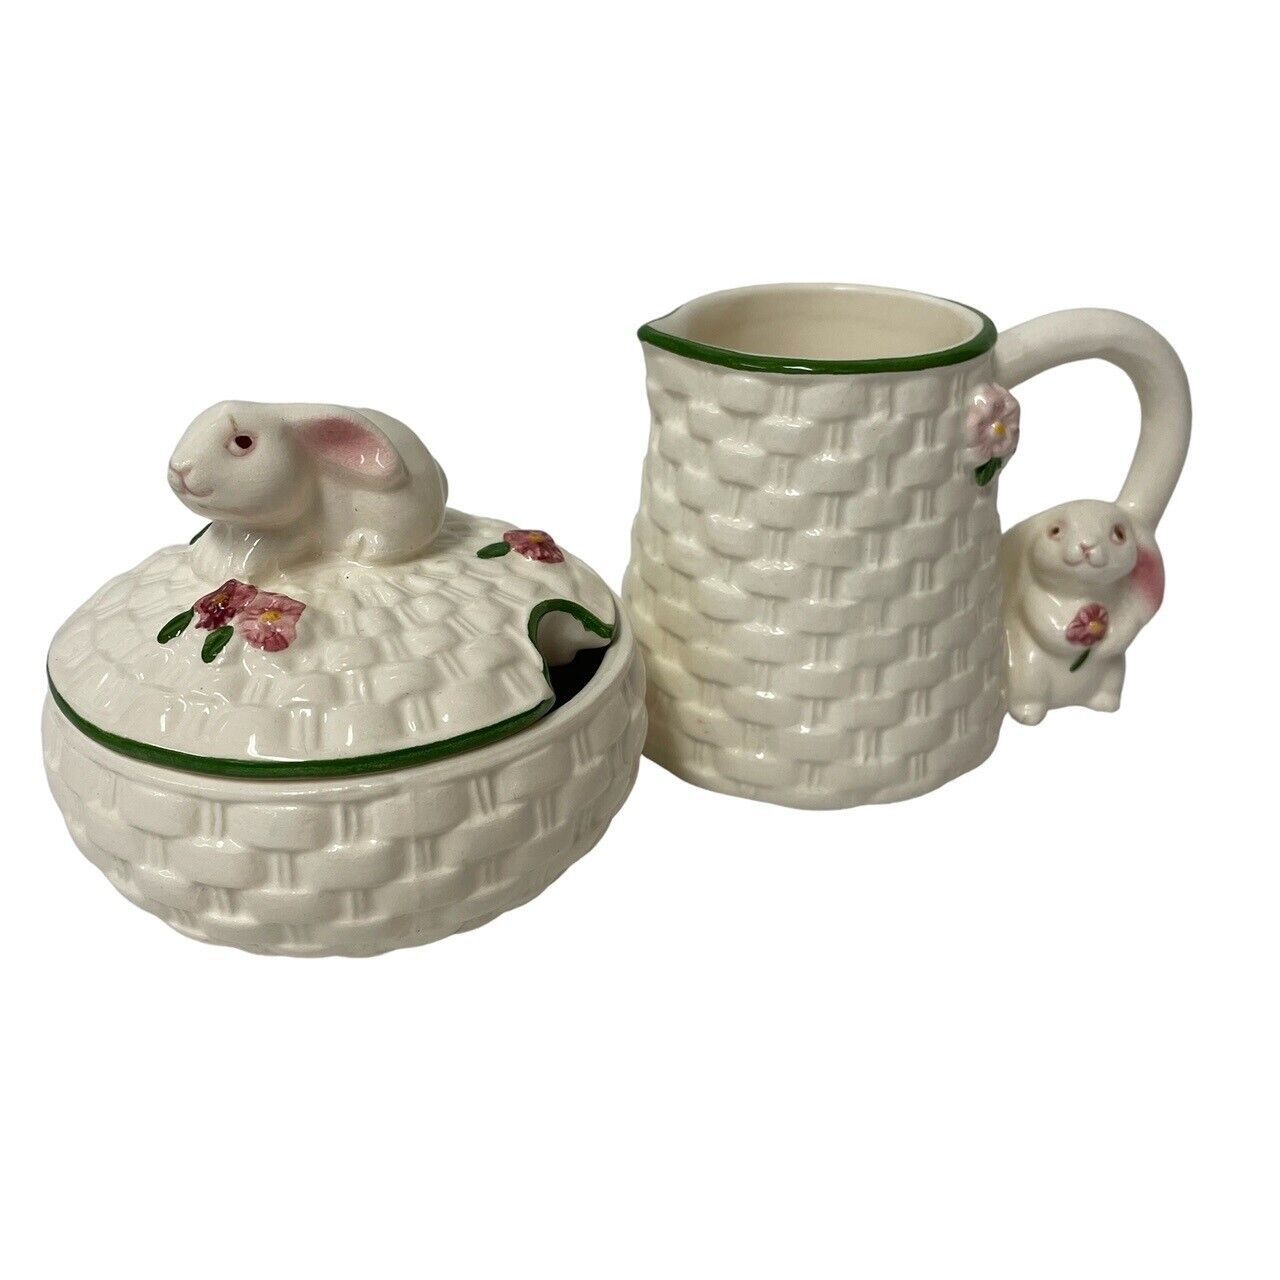 Avon Bunny Sugar And Creamer Set Gift Collection New Open Box Very Nice Cute - £9.14 GBP